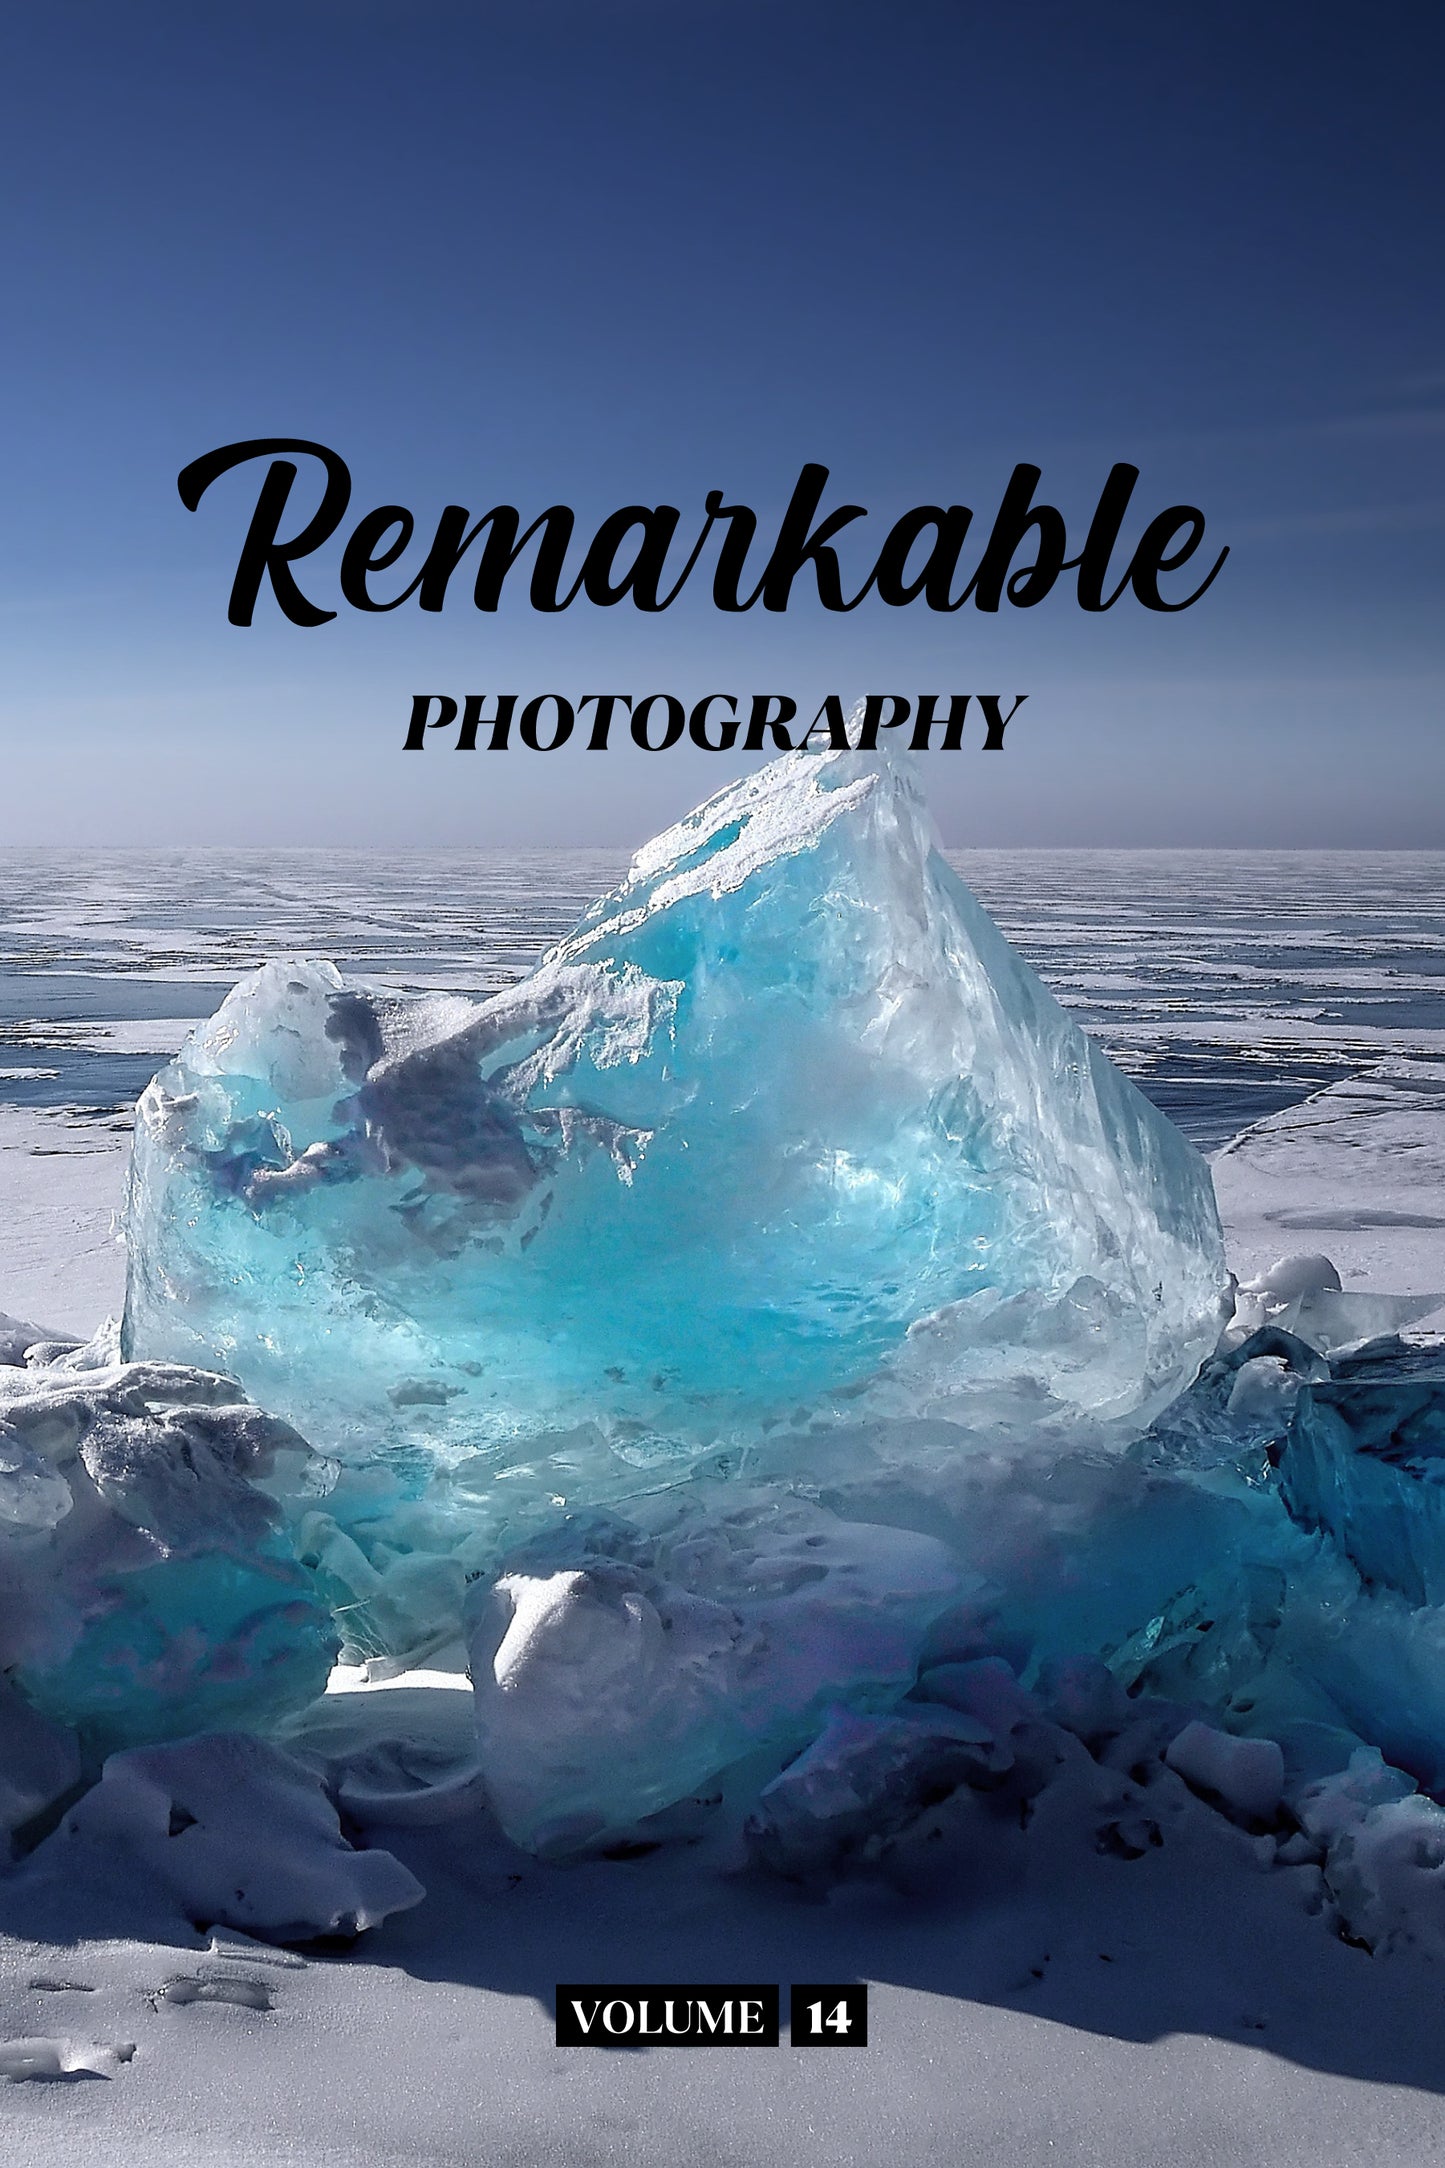 Remarkable Photography Volume 14 (Physical Book)